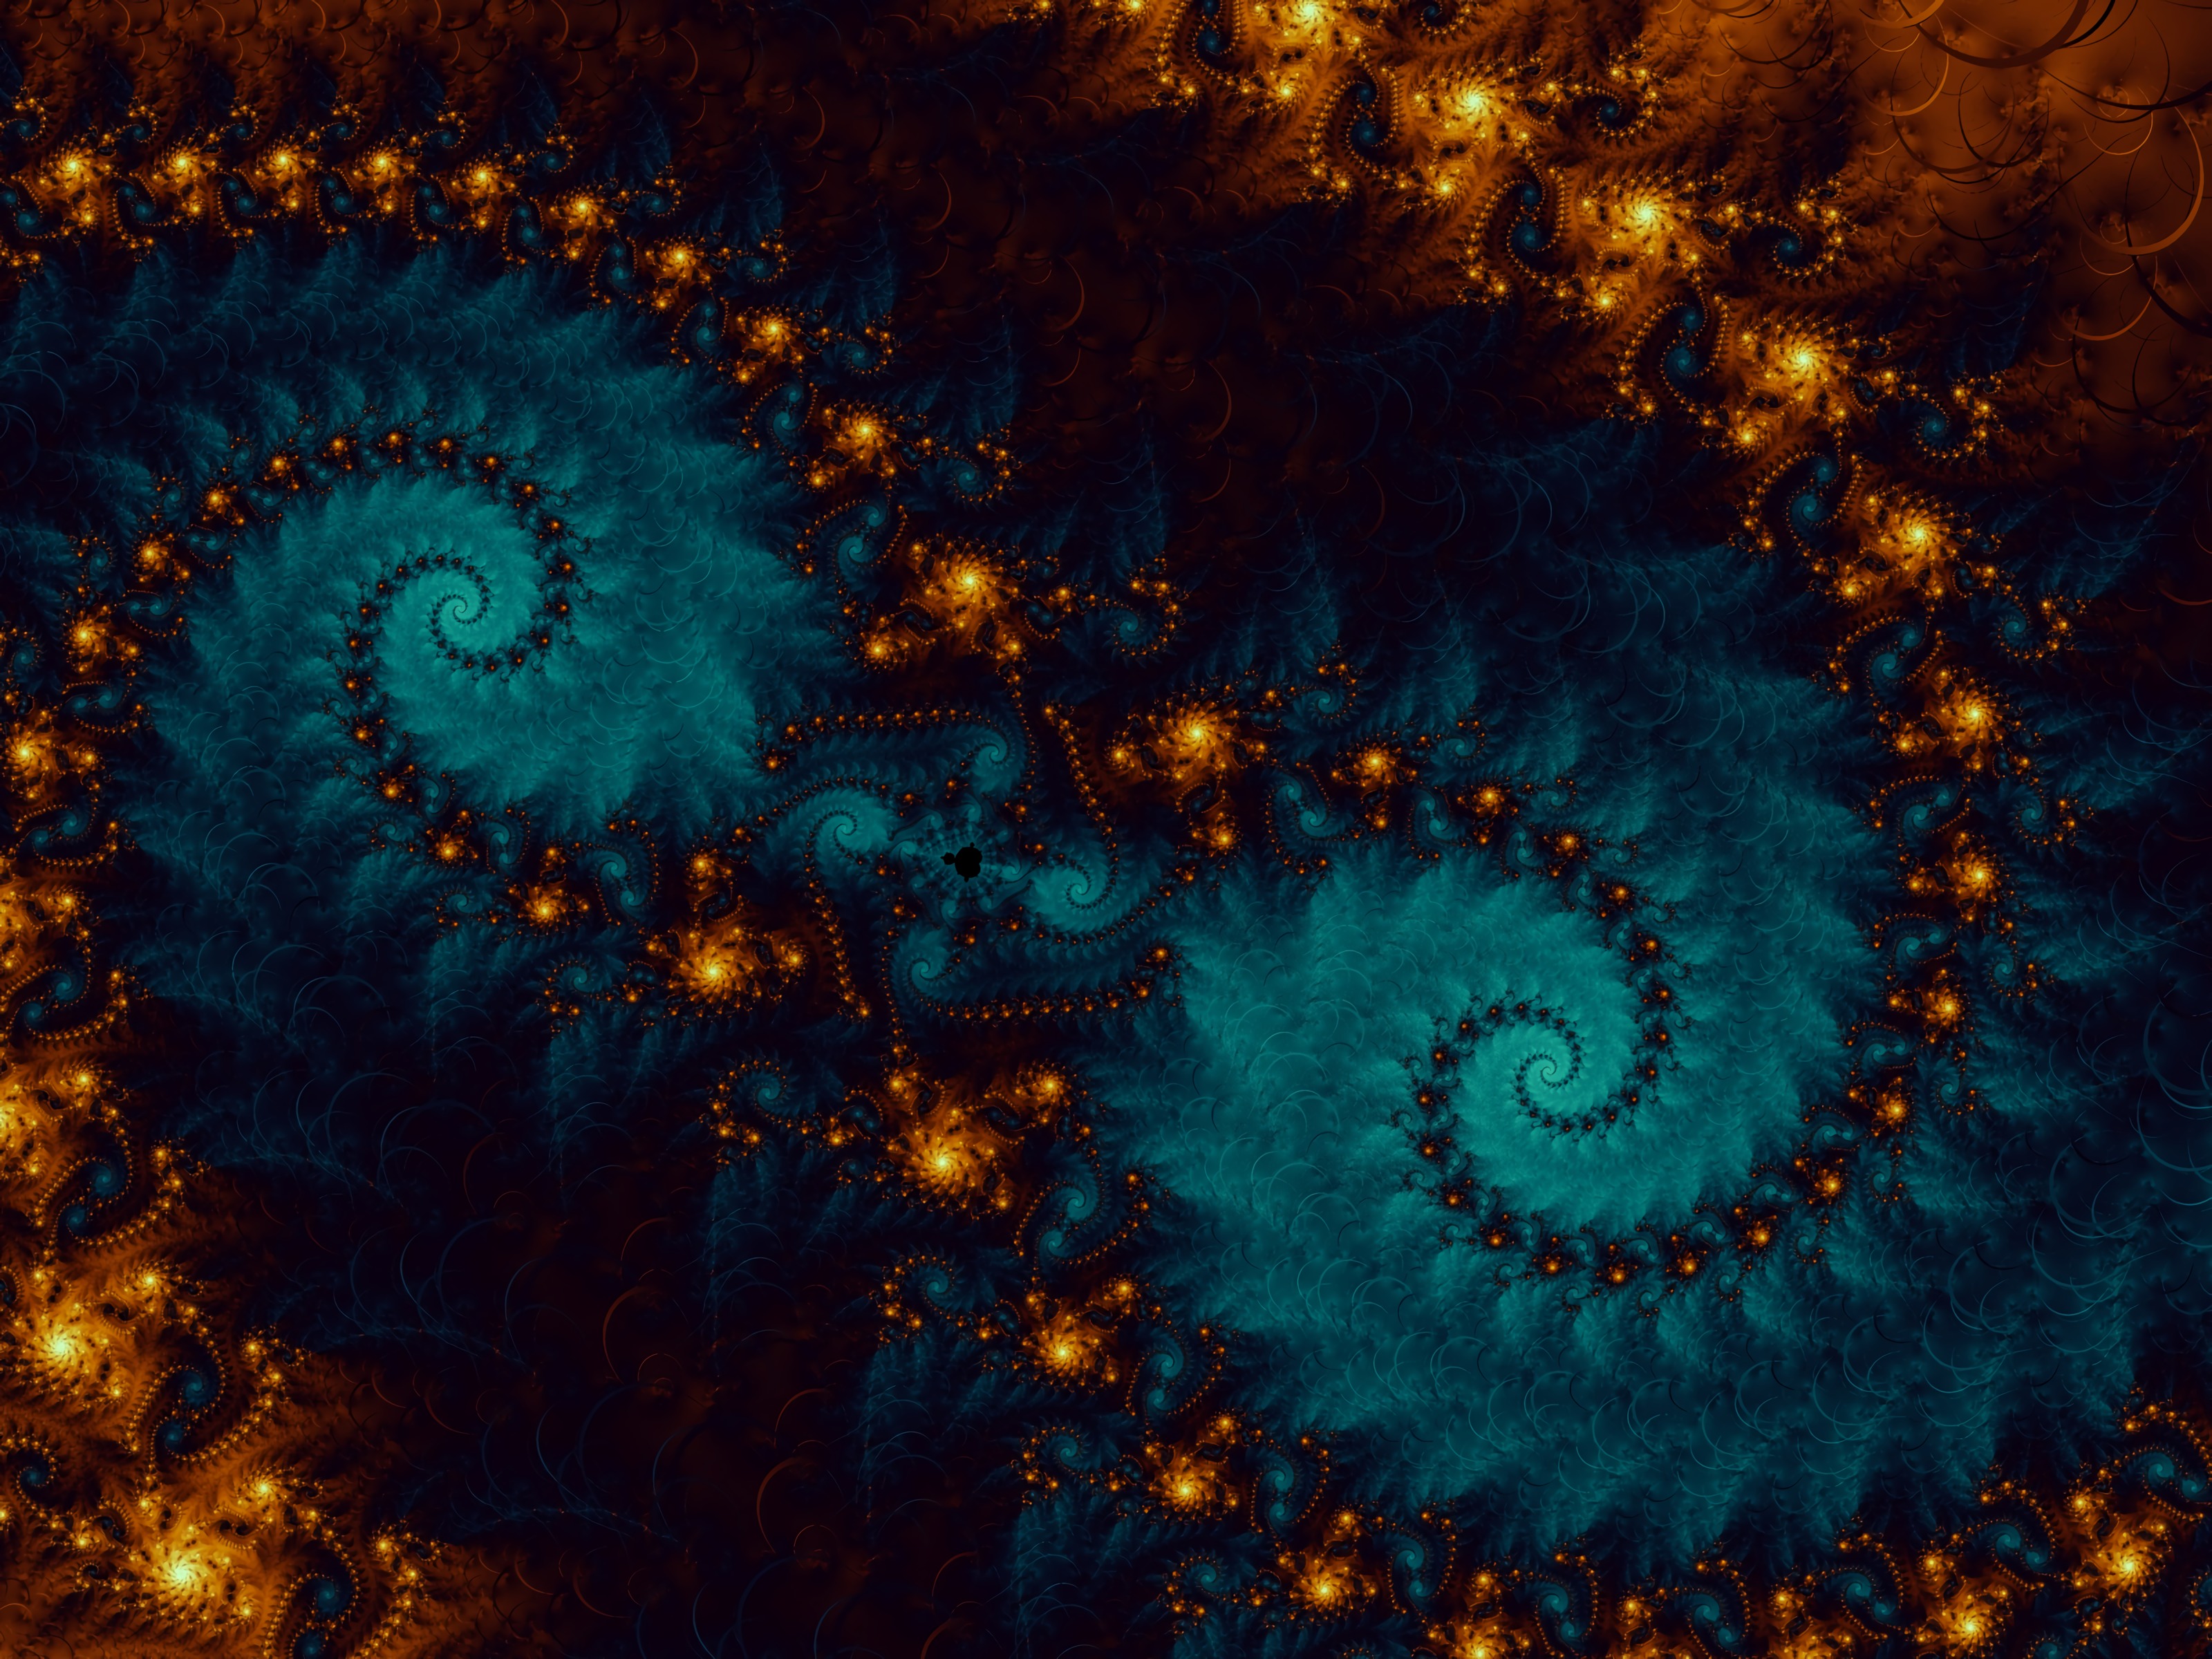 fractal, abstract, pattern, spiral, swirling, involute 4K Ultra